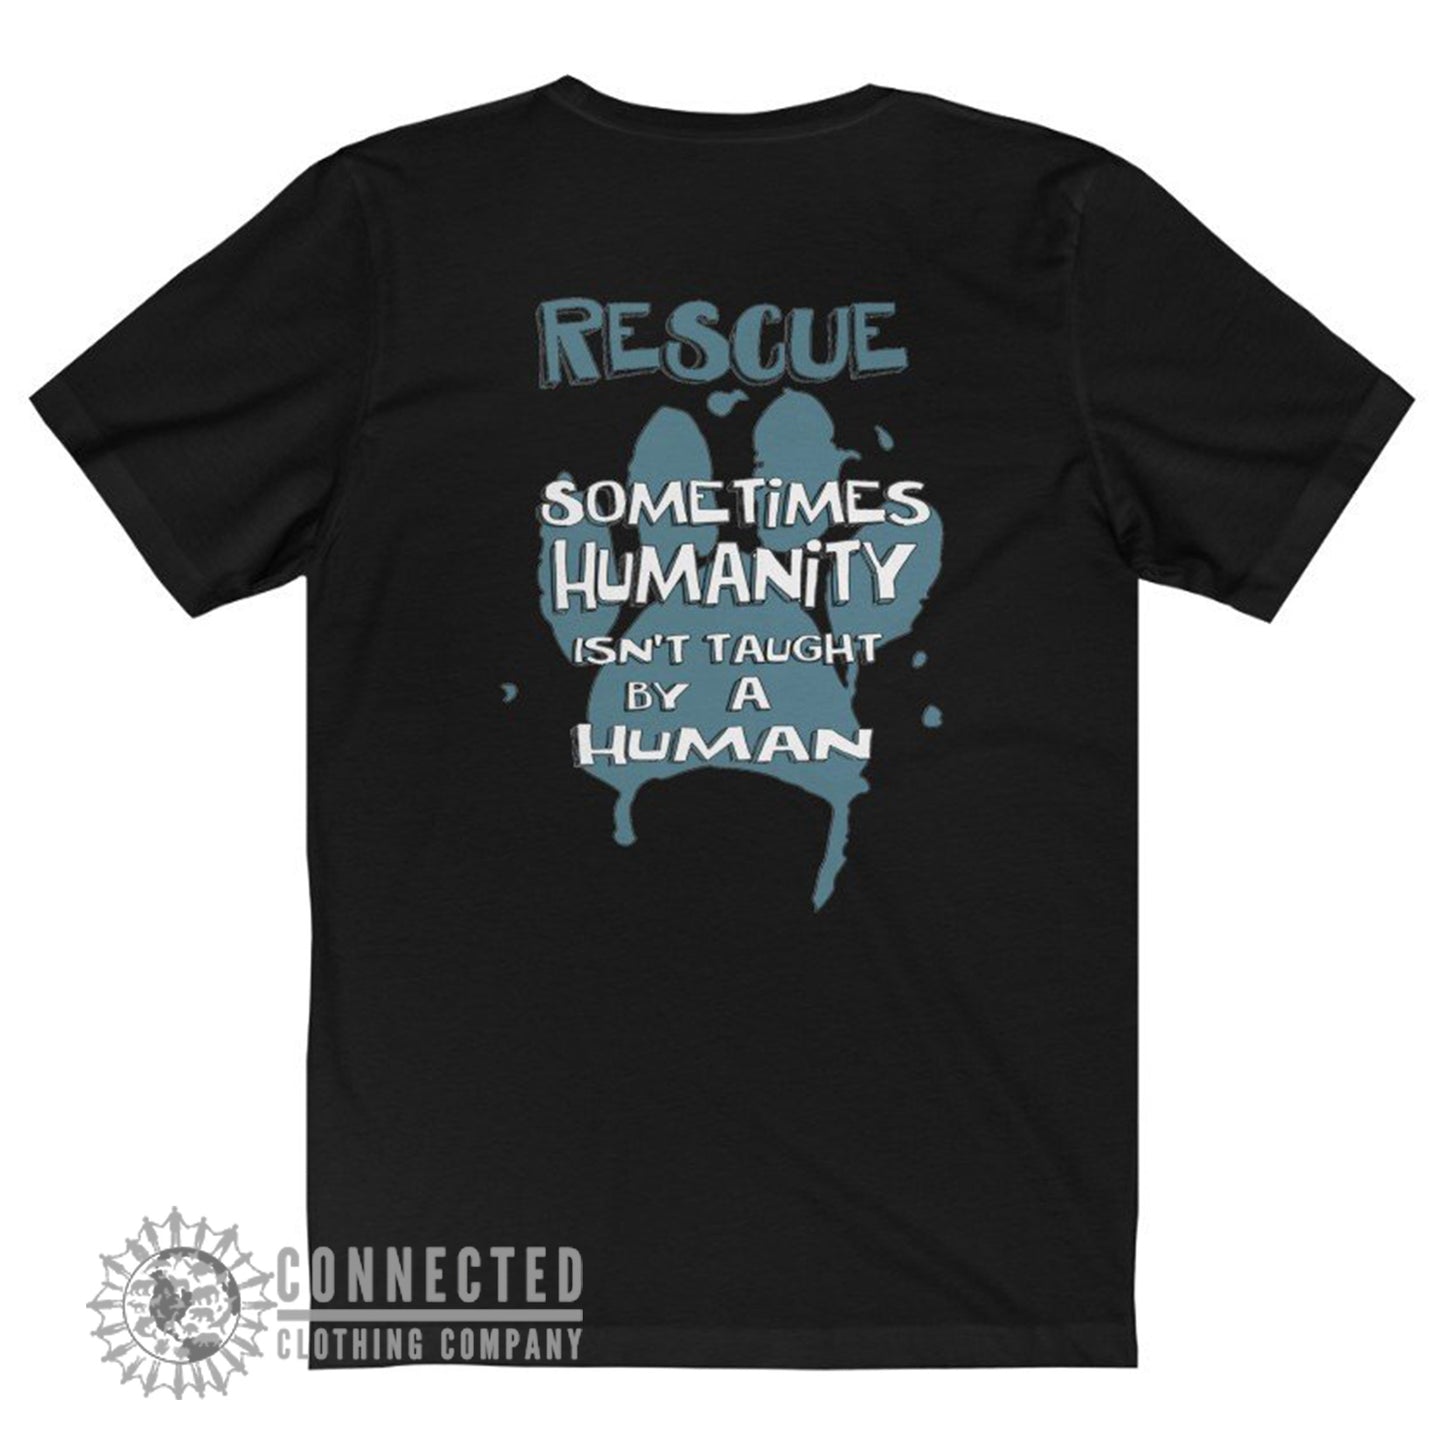 Back of Black Show Humanity Short-Sleeve Tee reads "Rescue. Sometimes humanity isn't taught by a human" - sweetsherriloudesigns - Ethically and Sustainably Made - 10% donated to animal rescue